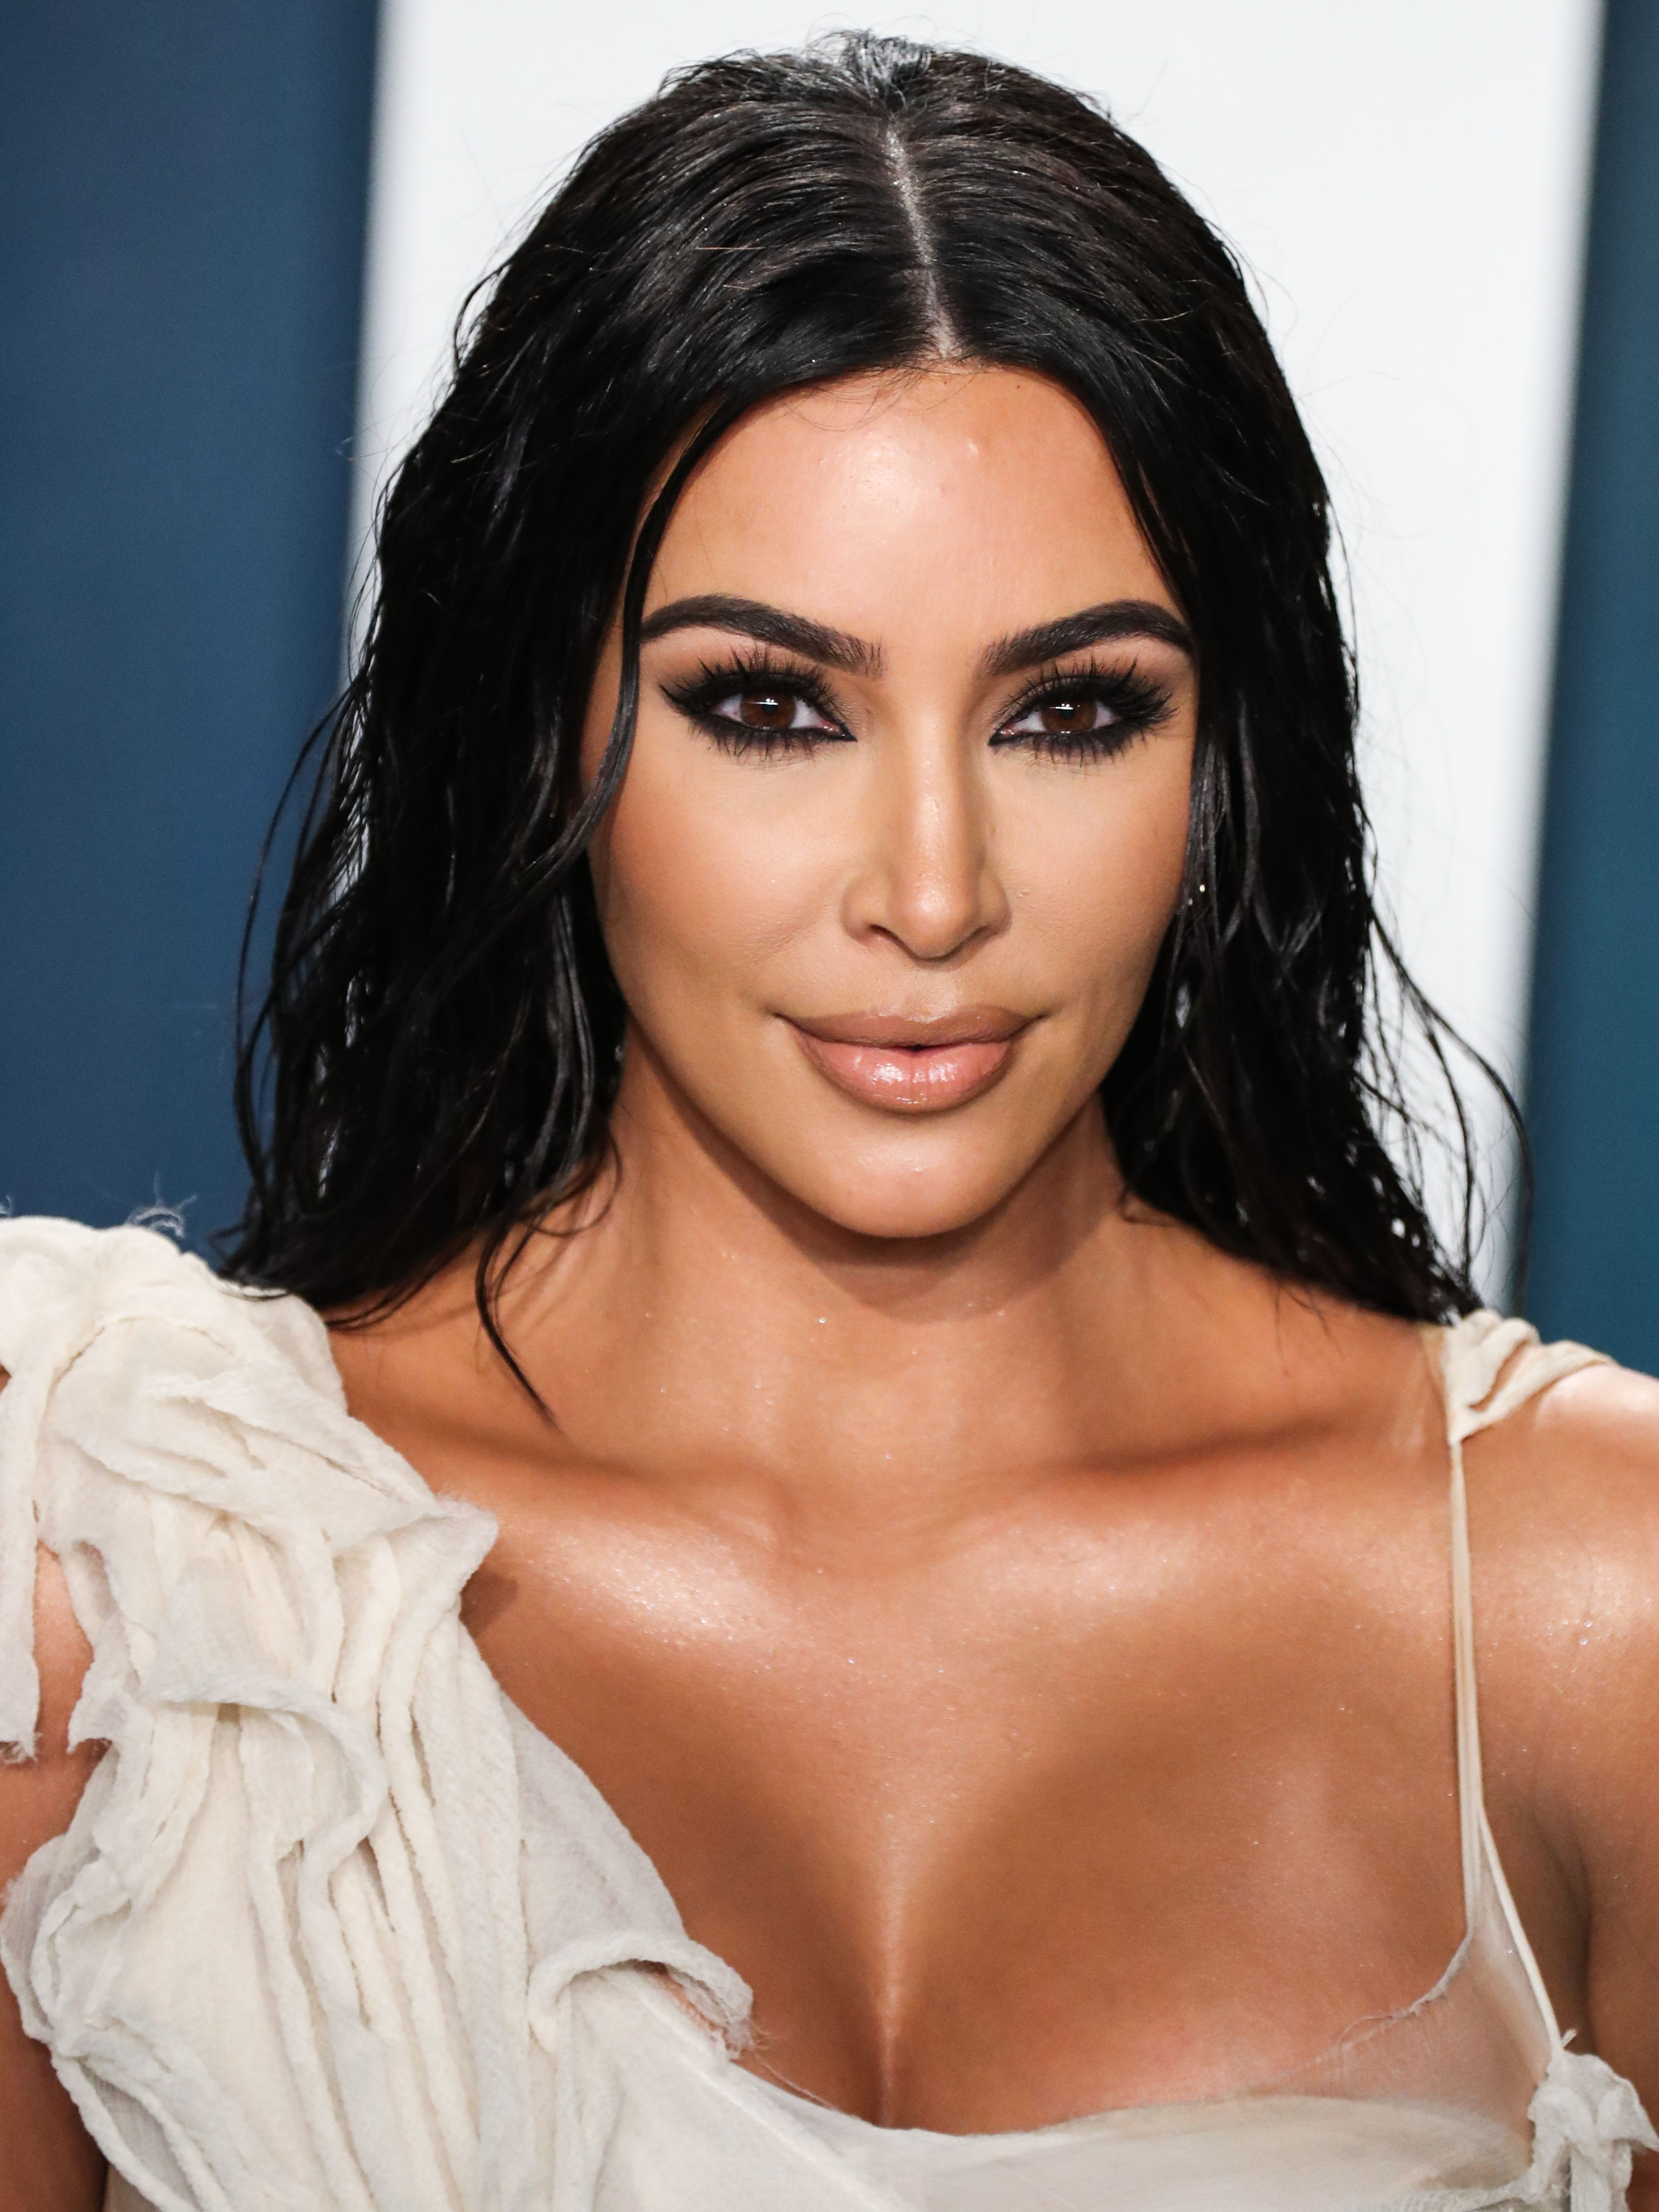 Kim Kardashian hit with cease-and-desist warning by rival beauty brand  after attempting to file trademark for 'SKKN